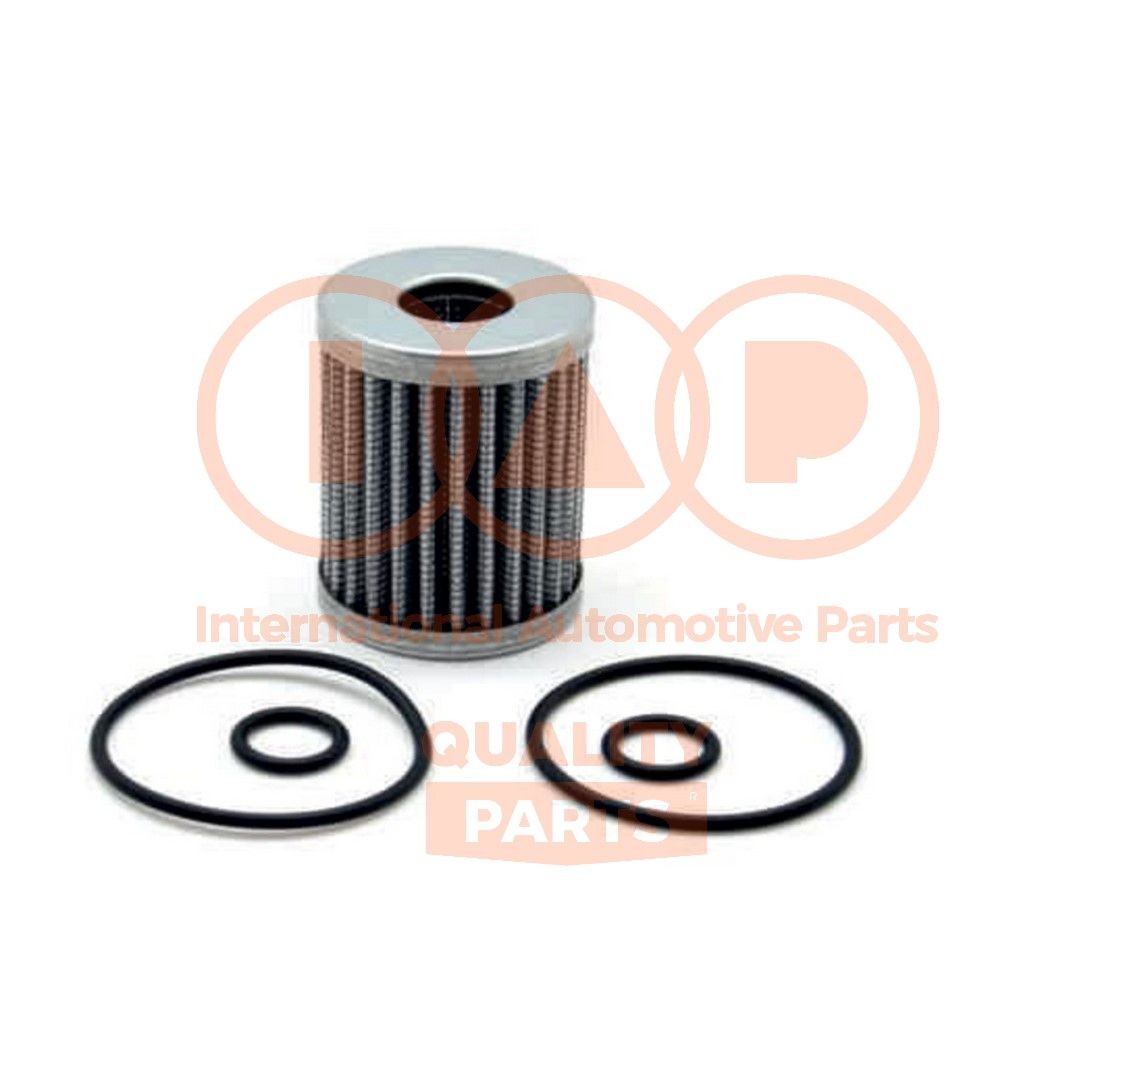 IAP QUALITY PARTS 122-GAS07P Fuel filter CHEVROLET experience and price